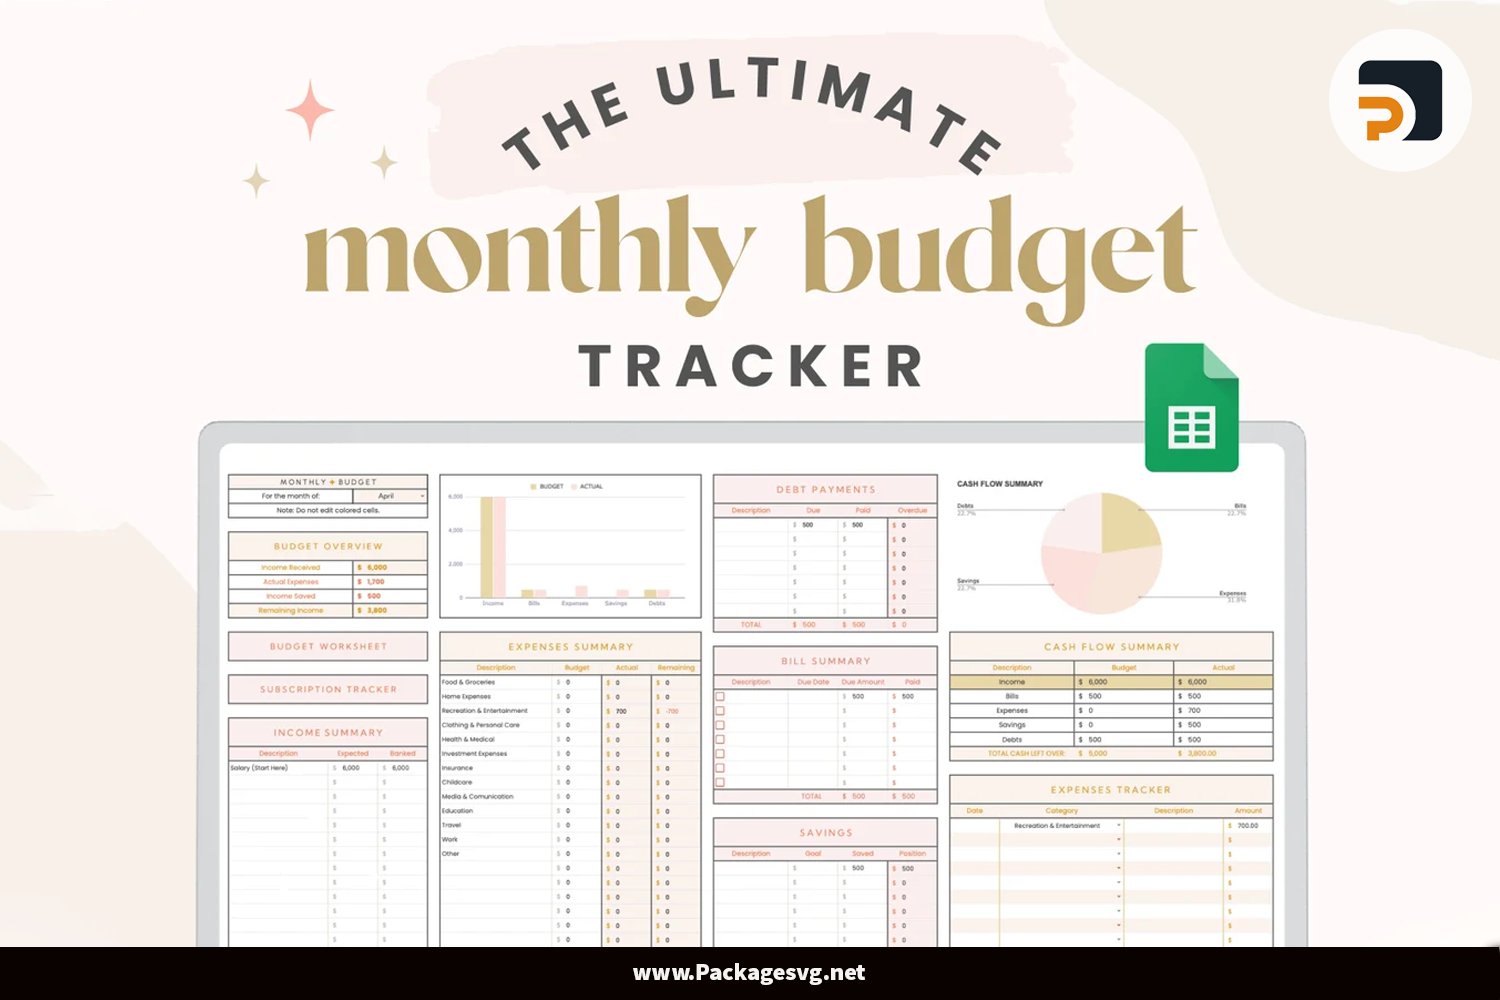 The Ultimate Monthly Budget Tracker